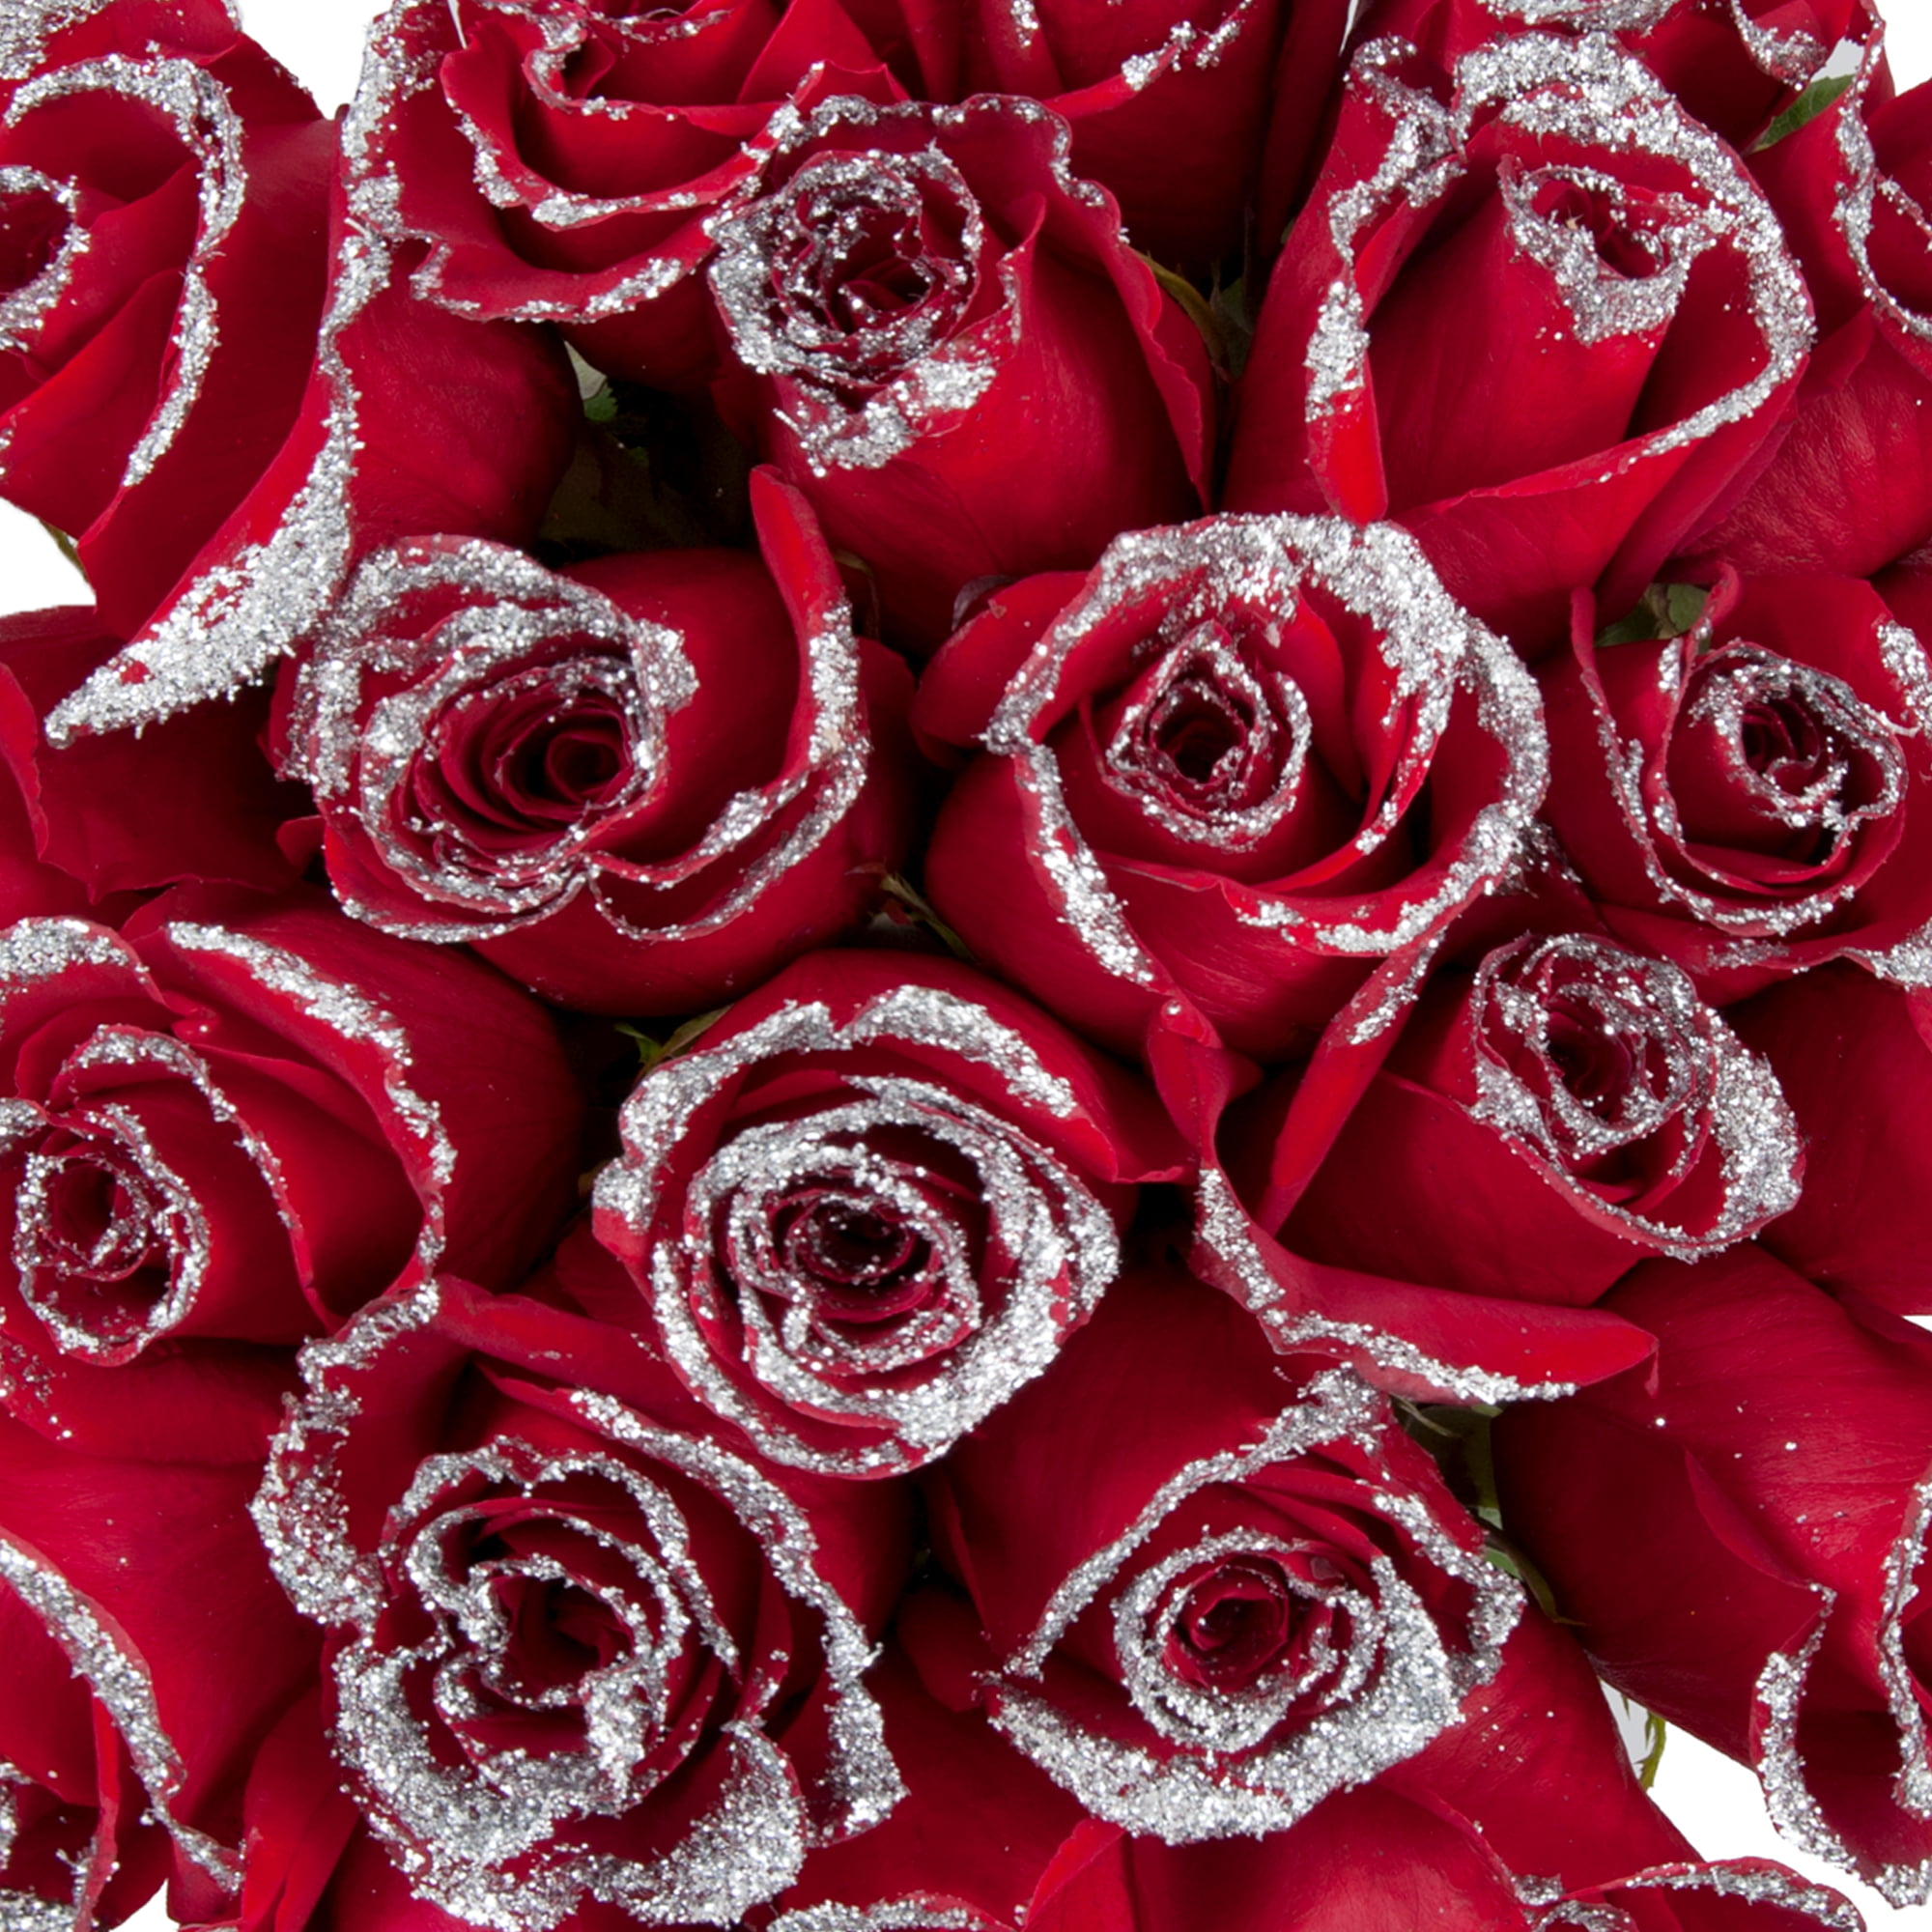 Roses 50 Stems of Red Farm Direct Fresh Cut Flowers with Hand Painted  Silver Glitter on the Bloom Tips by Bloomingmore 